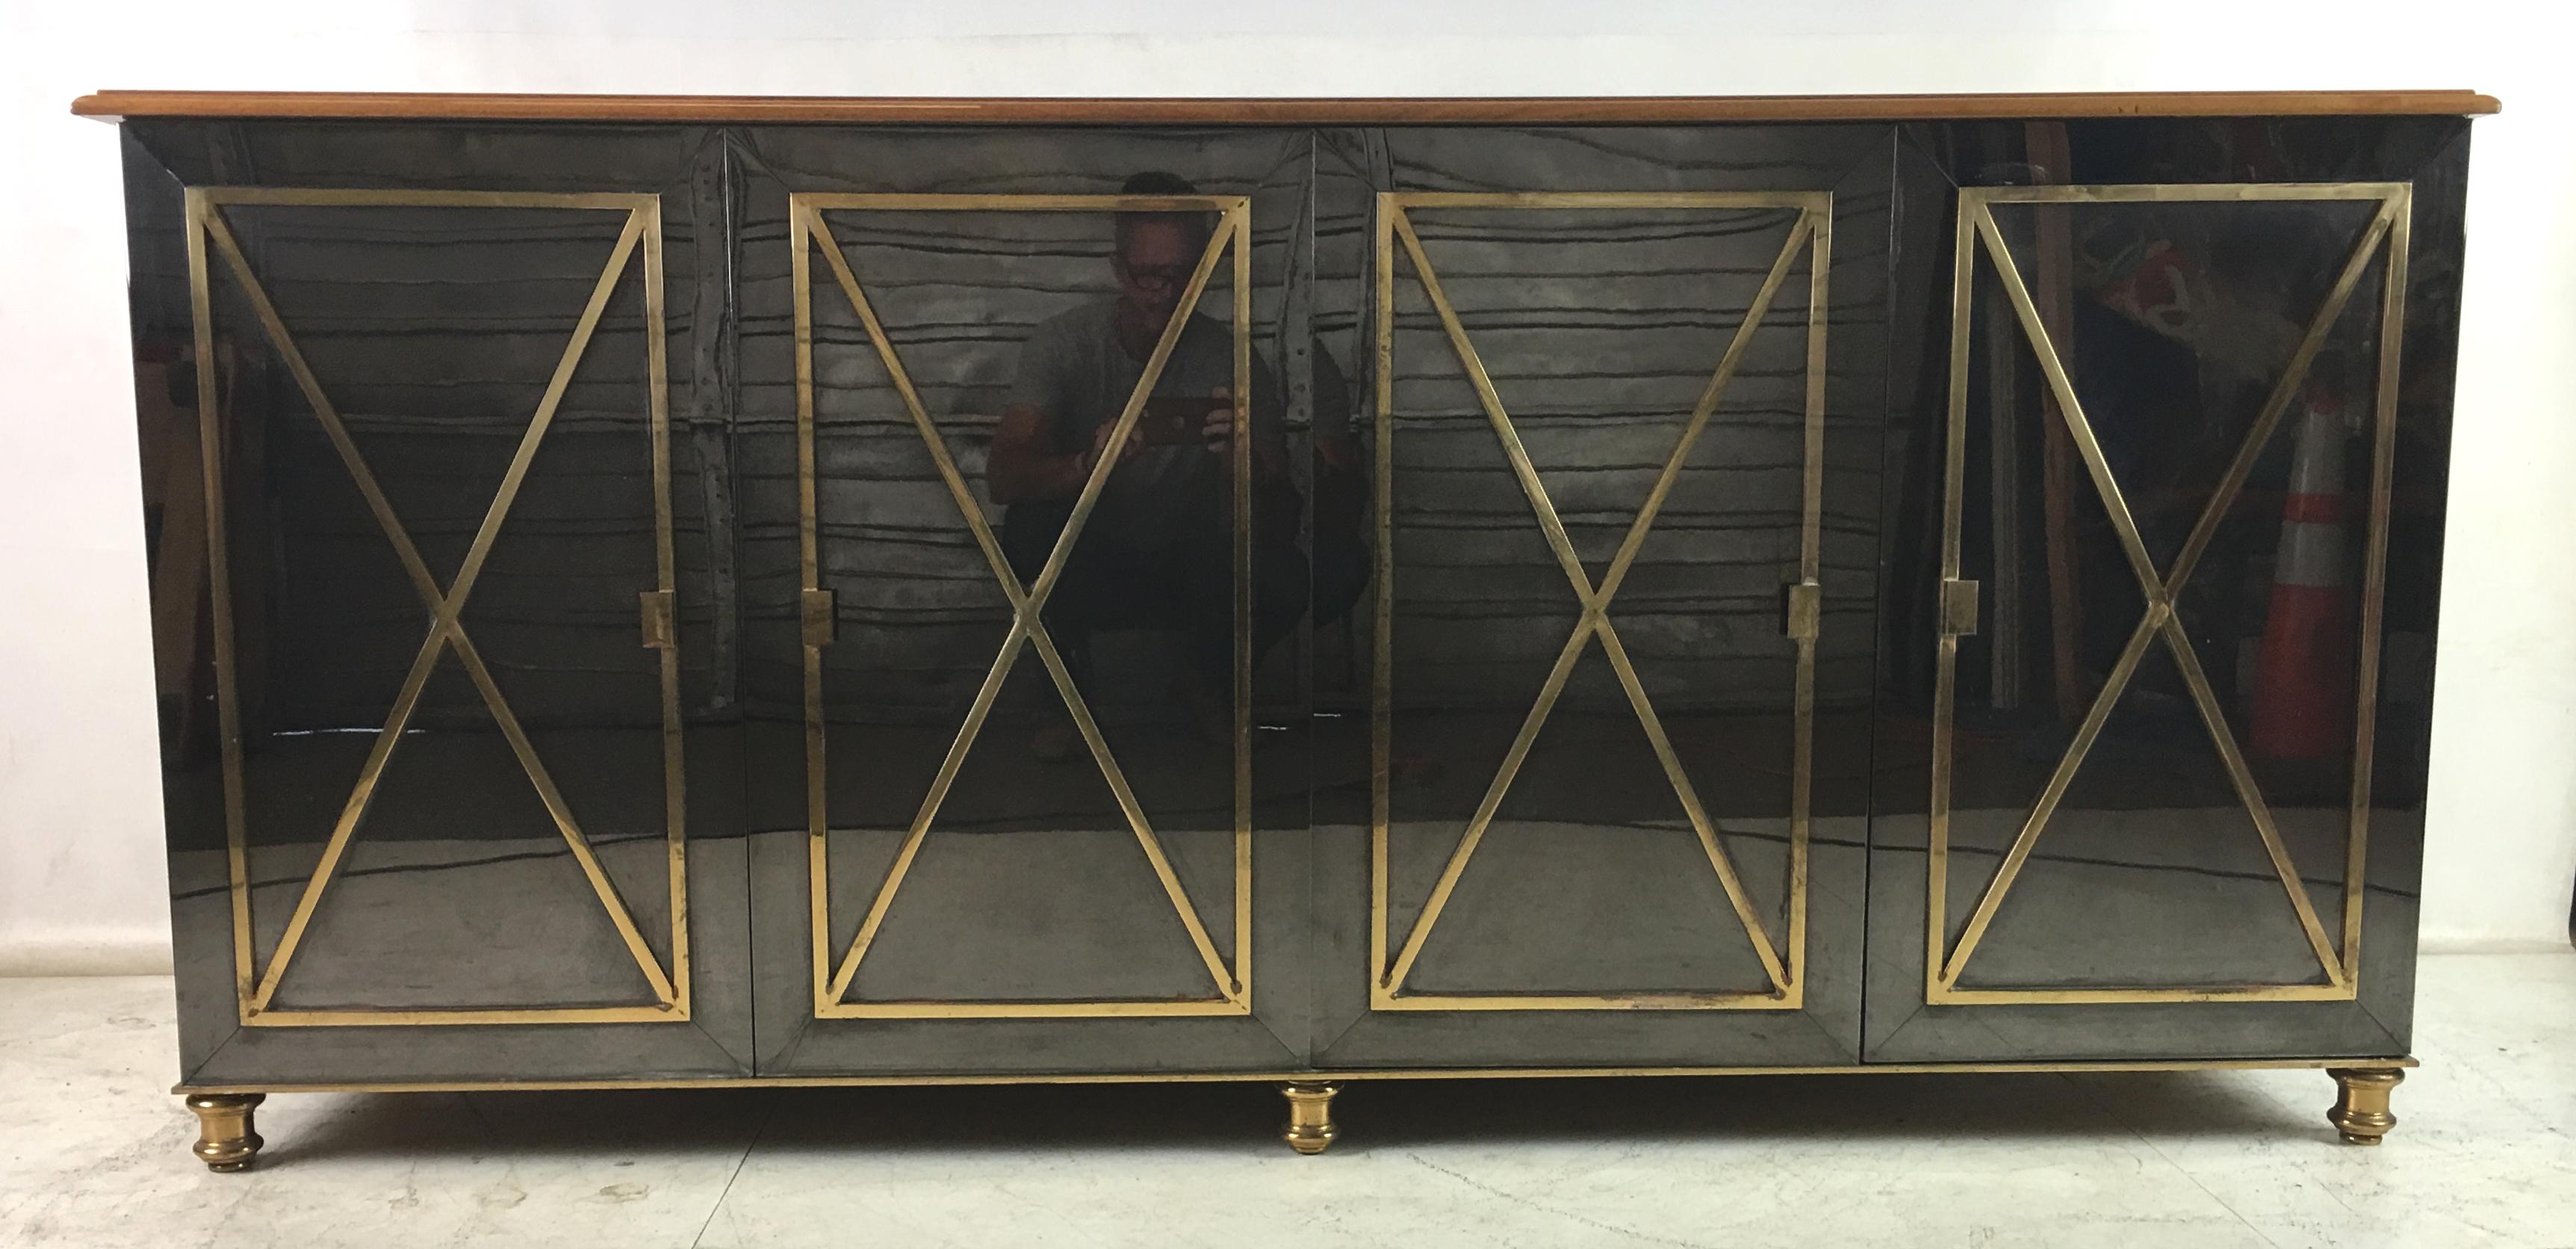 Spectacular neoclassical modern gunmetal sideboard with brass fittings and walnut top. The cabinet is entirely clad in gunmetal plated steel with solid brass ornamentation and turned brass bun feet. The interior, its four shallow drawers and